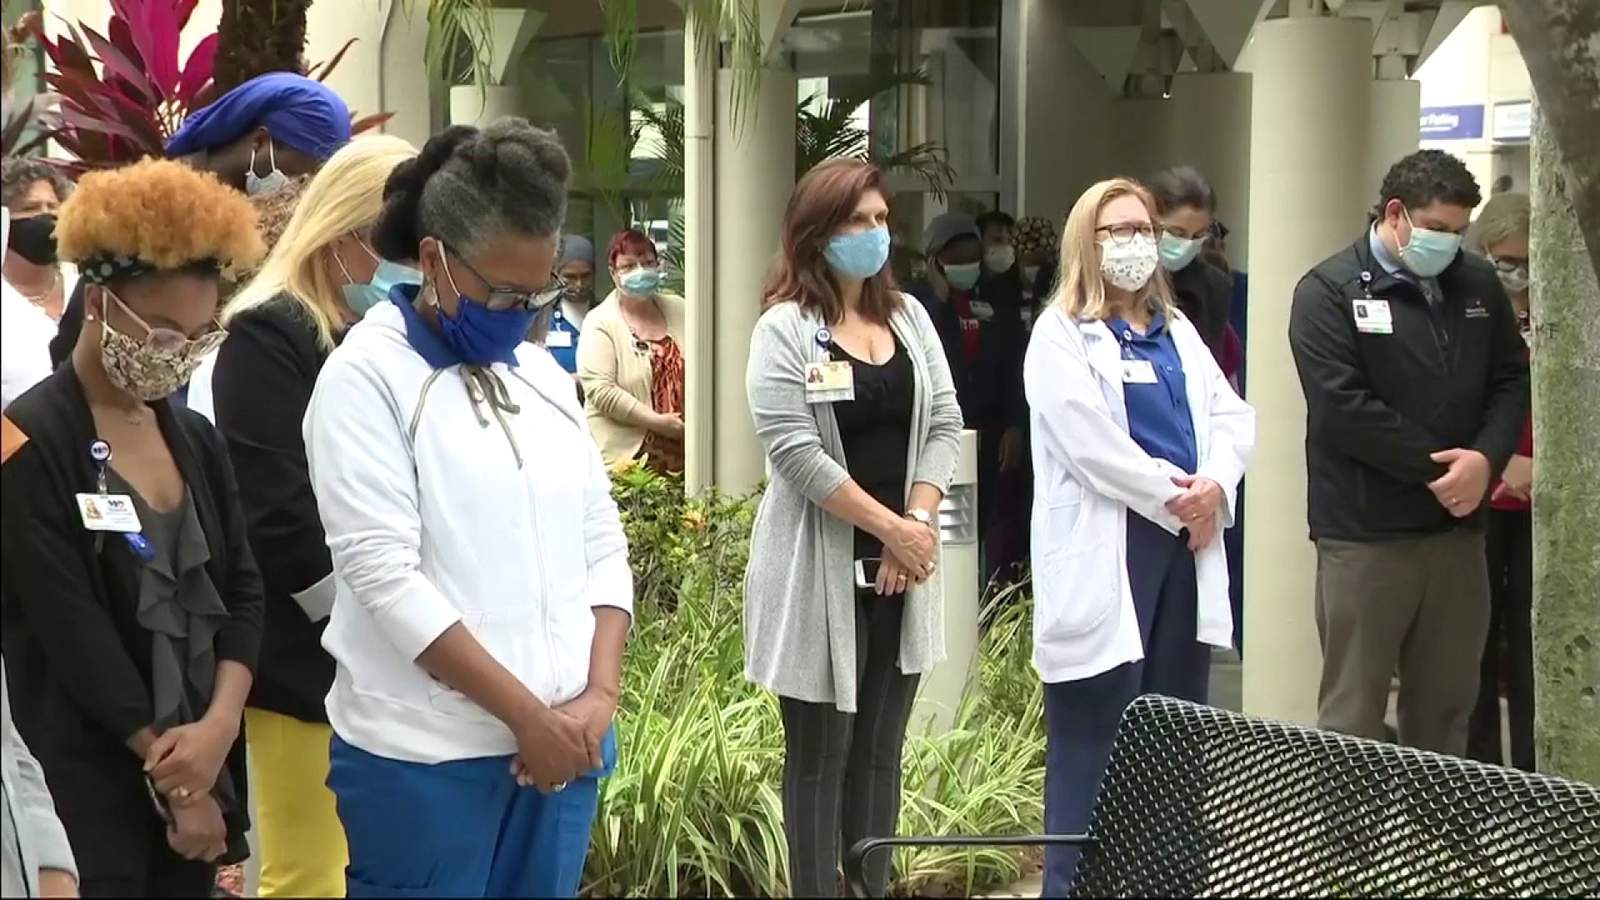 South Florida healthcare workers come together to pray for peace and unity